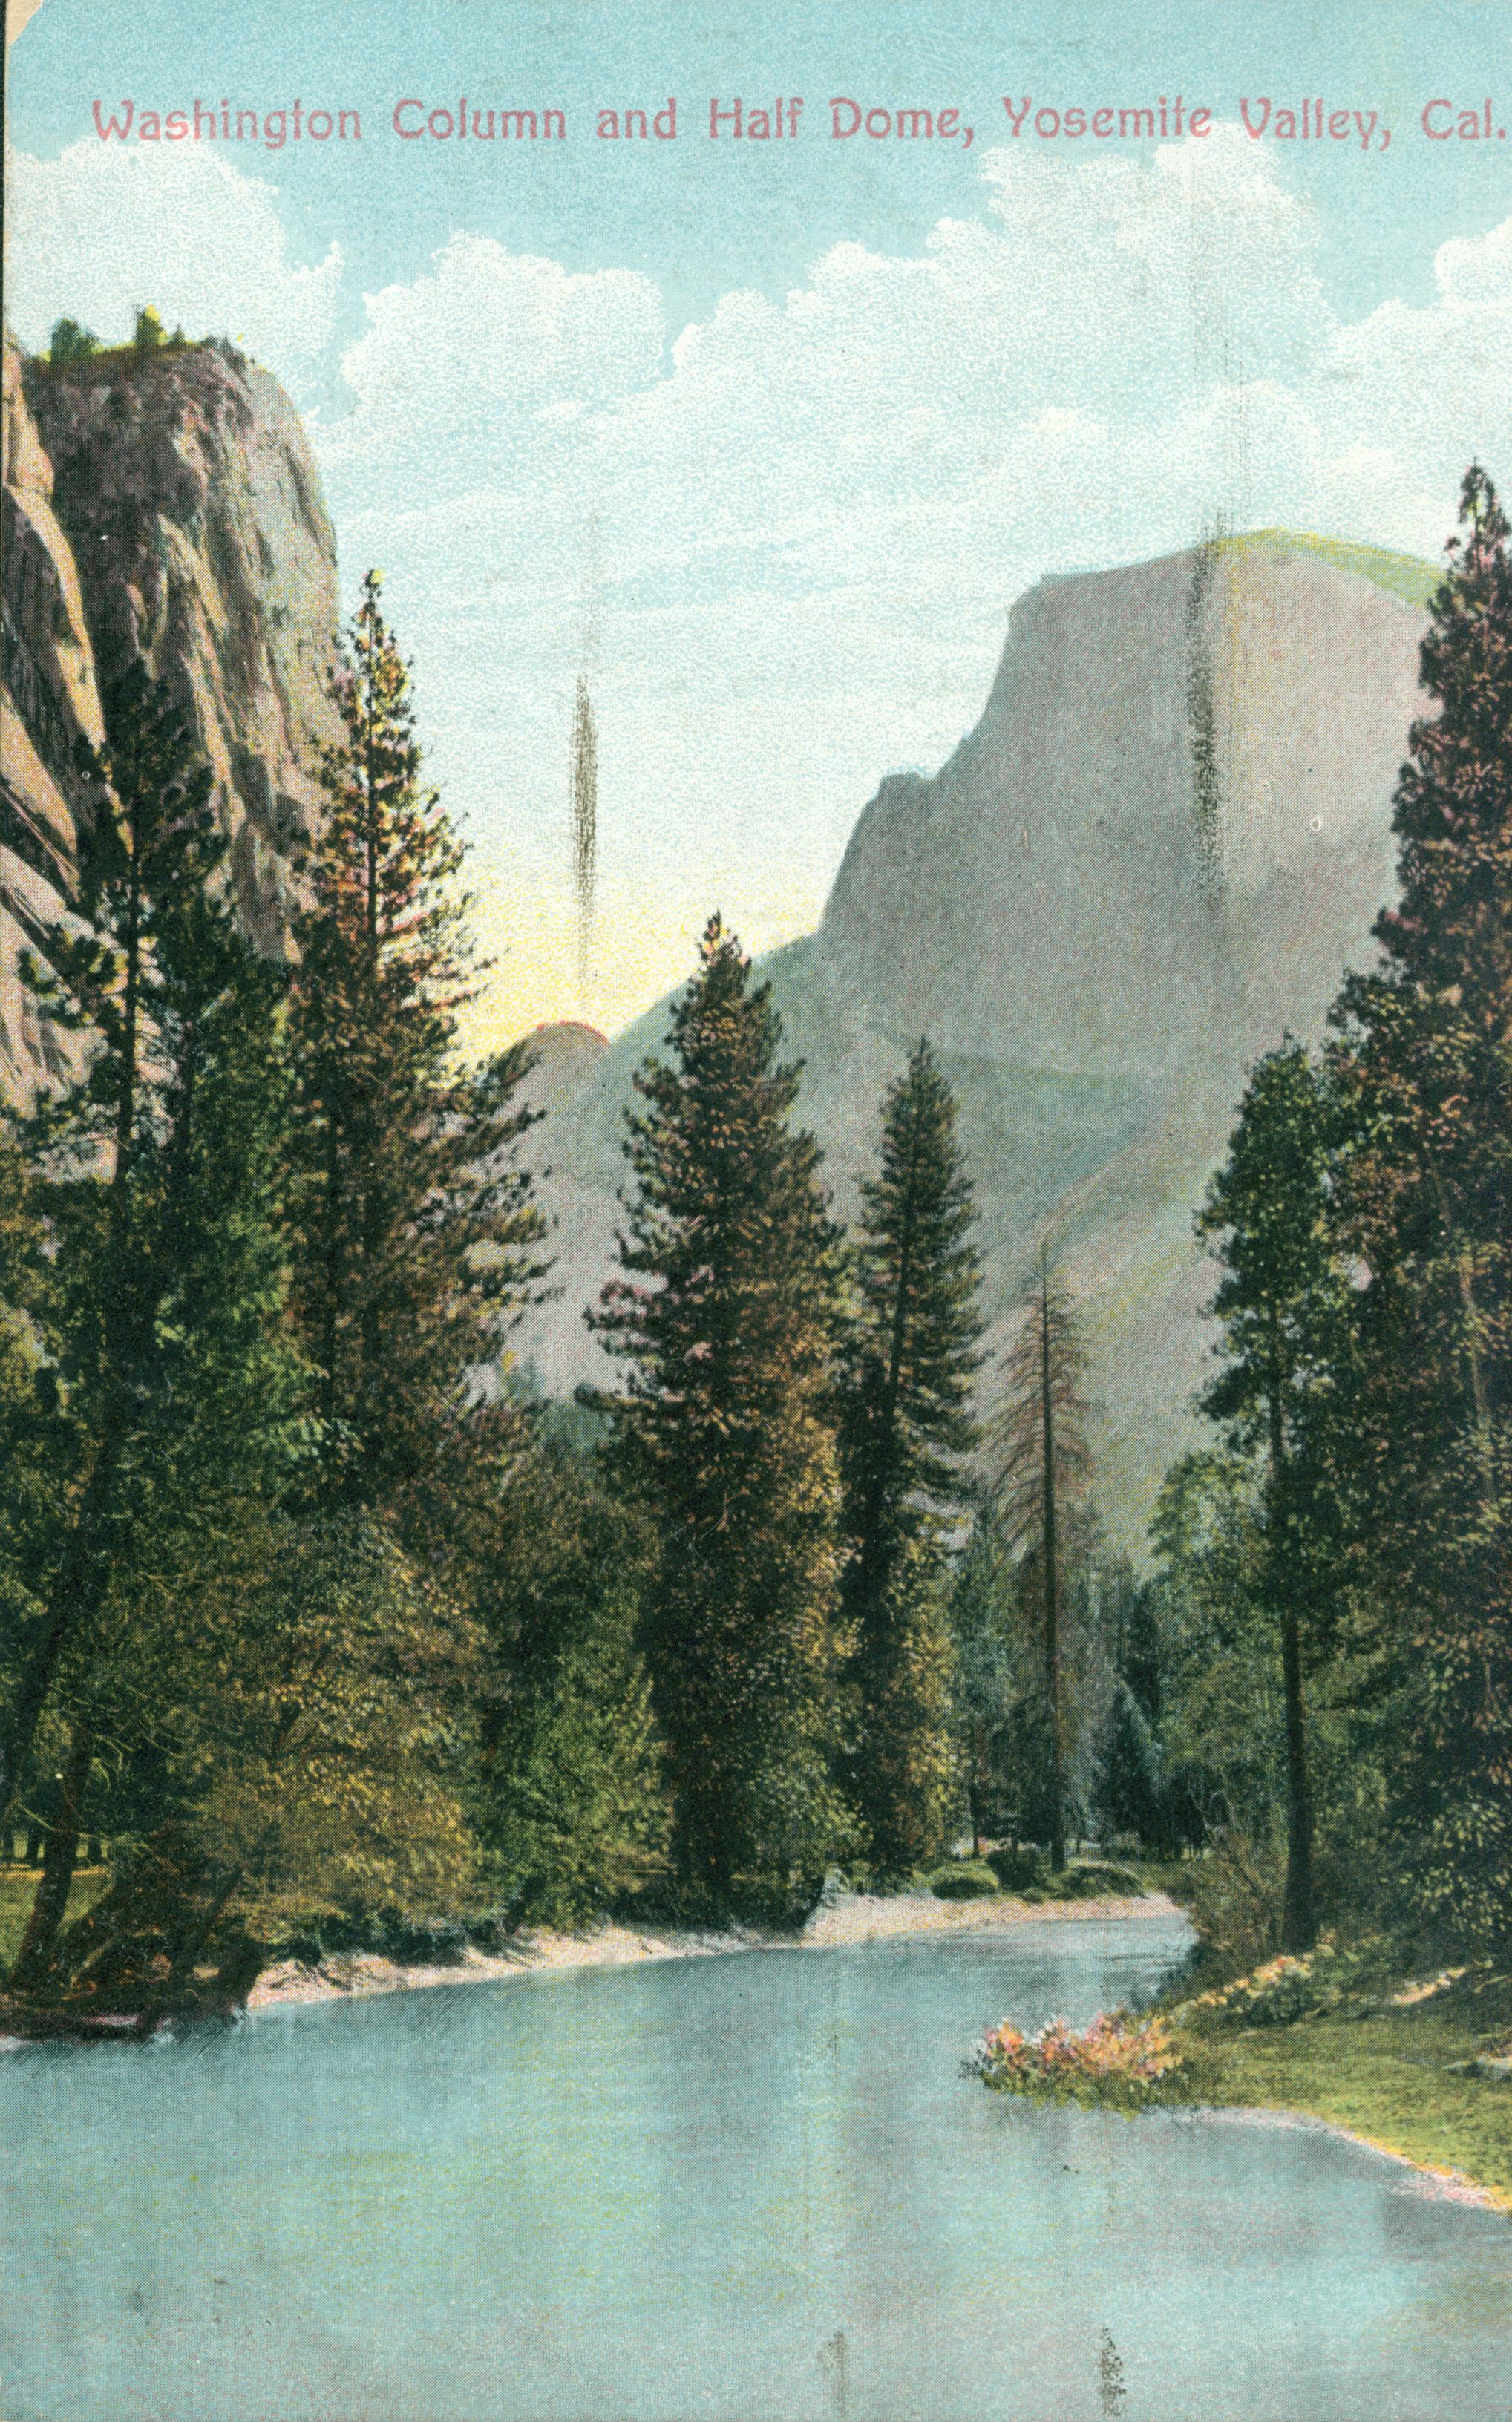 Shows a river lined with trees with Half Dome to the right and the Washington Column to the left.